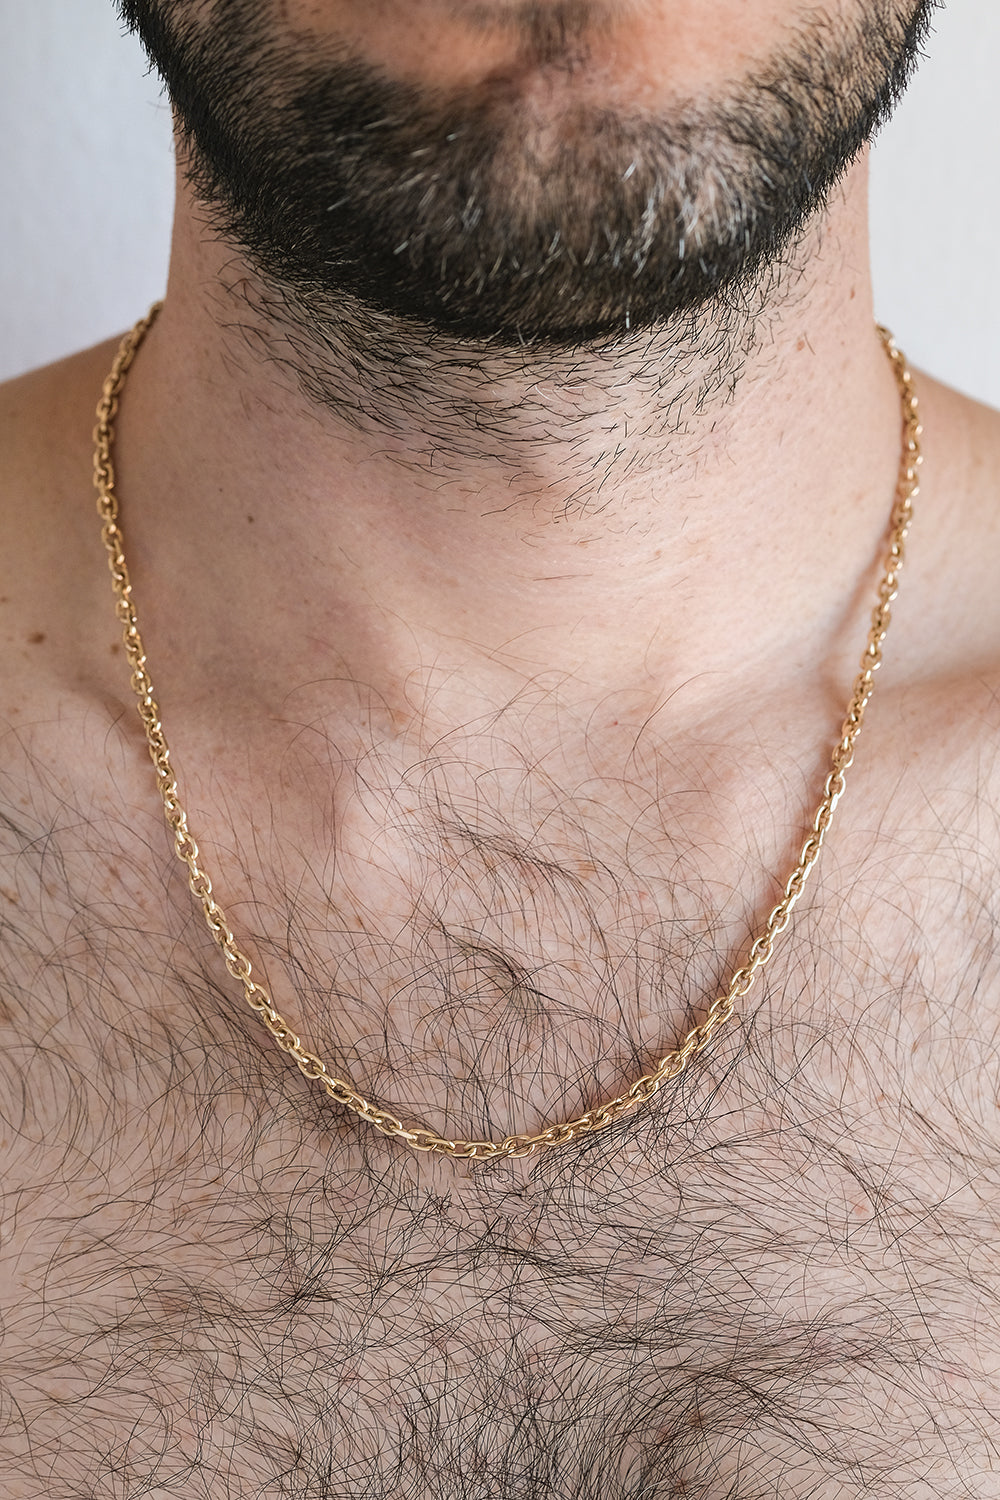 Gold Necklace For Men With Small Links